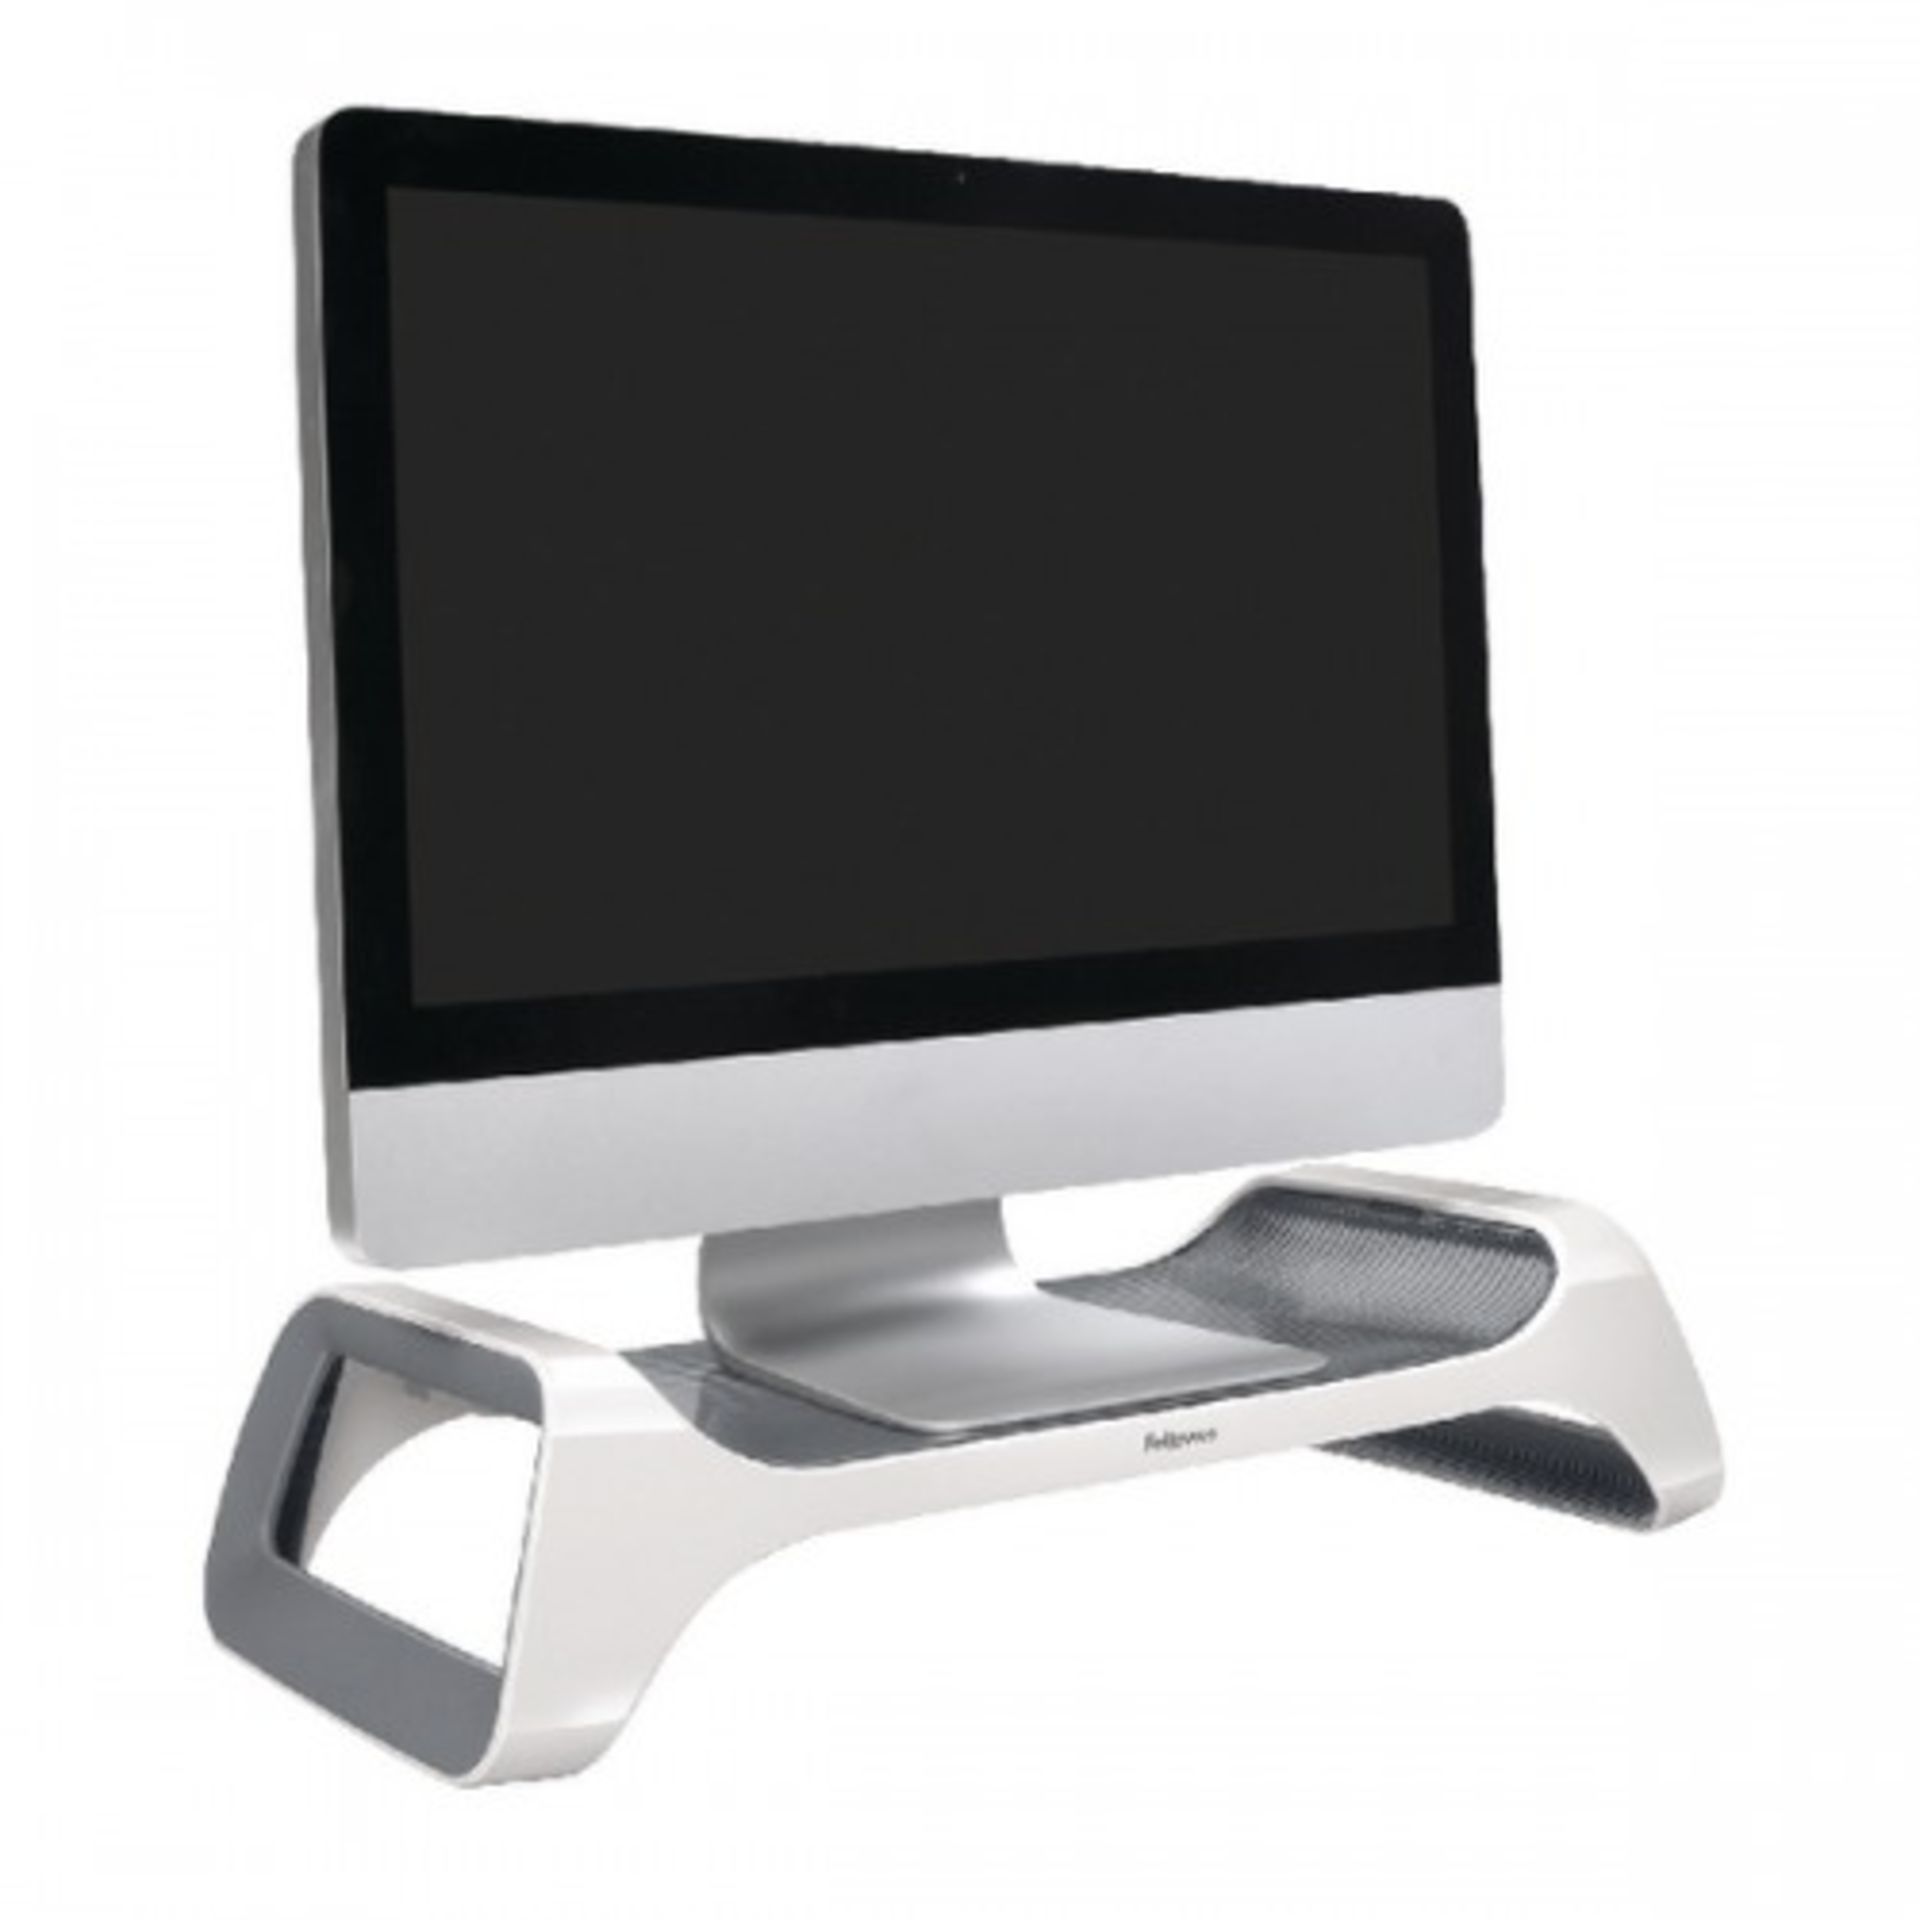 V Brand New Fellowes I-Spires Series Monitor Lift (Monitor Not Included) ISP £22.99 (Paperstone)